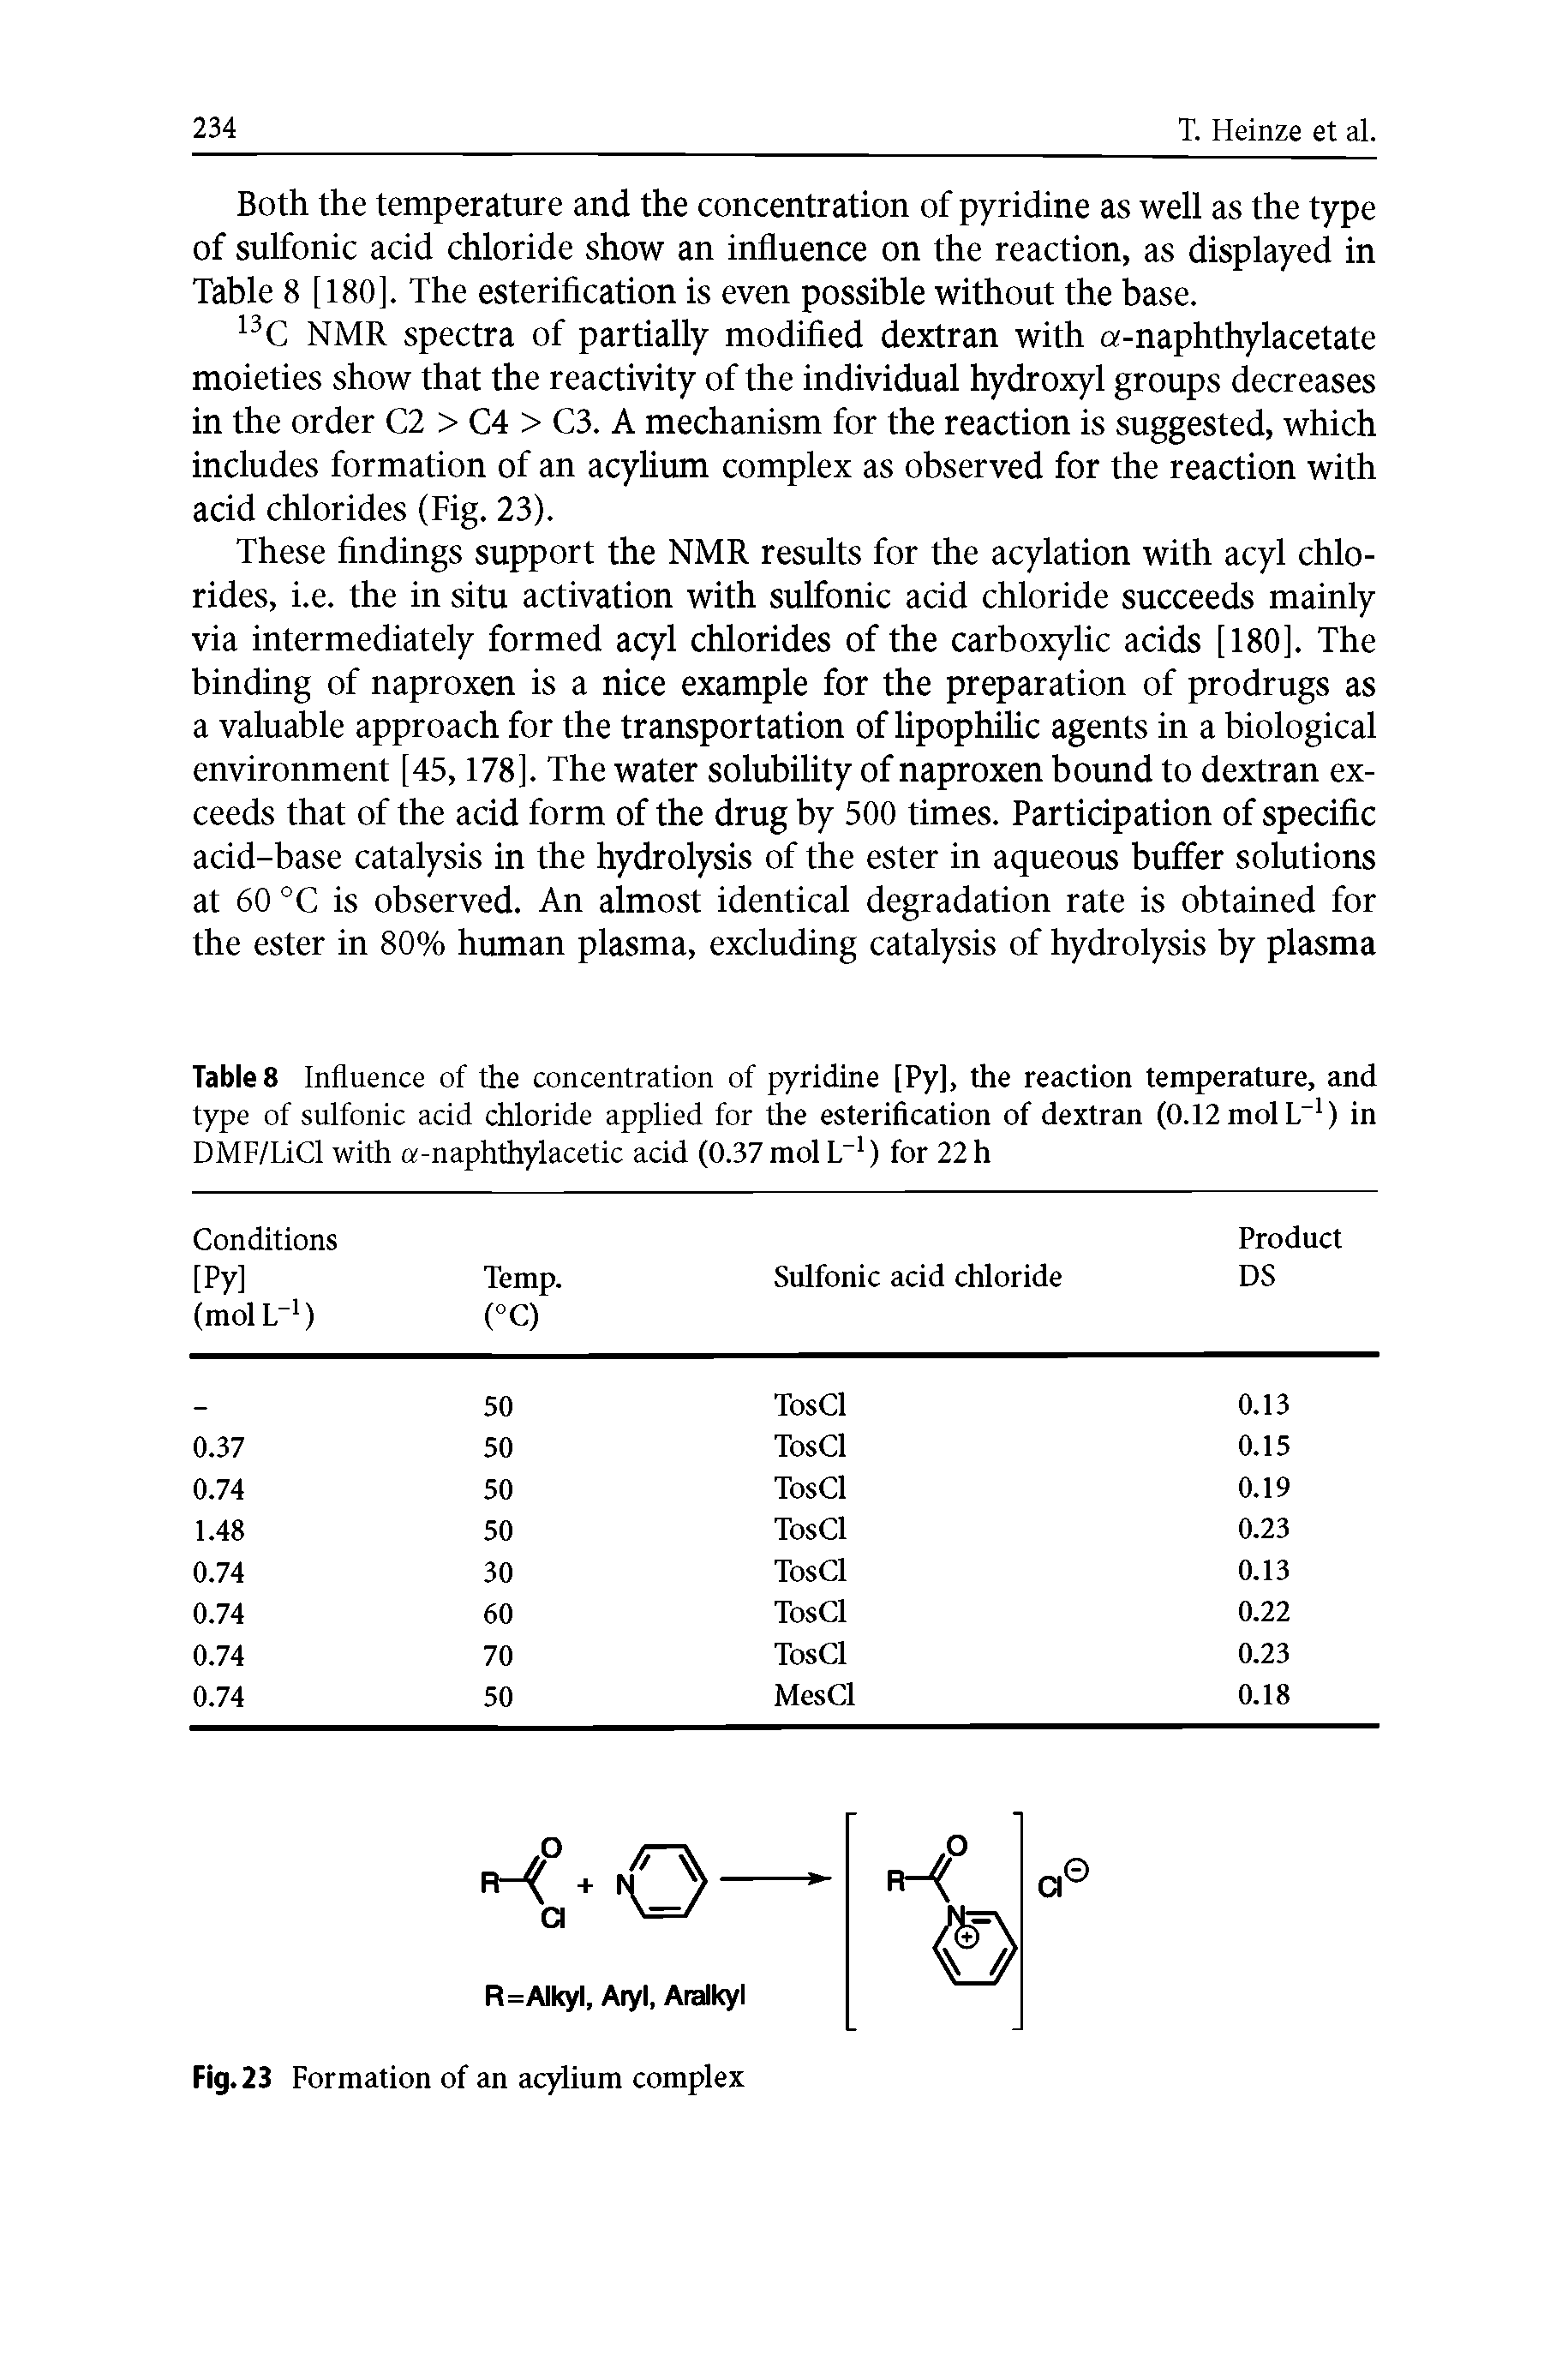 Table 8 Influence of the concentration of pyridine [Py], the reaction temperature, and type of sulfonic acid chloride applied for the esterification of dextran (0.12 mol L 1) in DMF/LiCl with a-naphthylacetic acid (0.37 mol L-1) for 22 h...